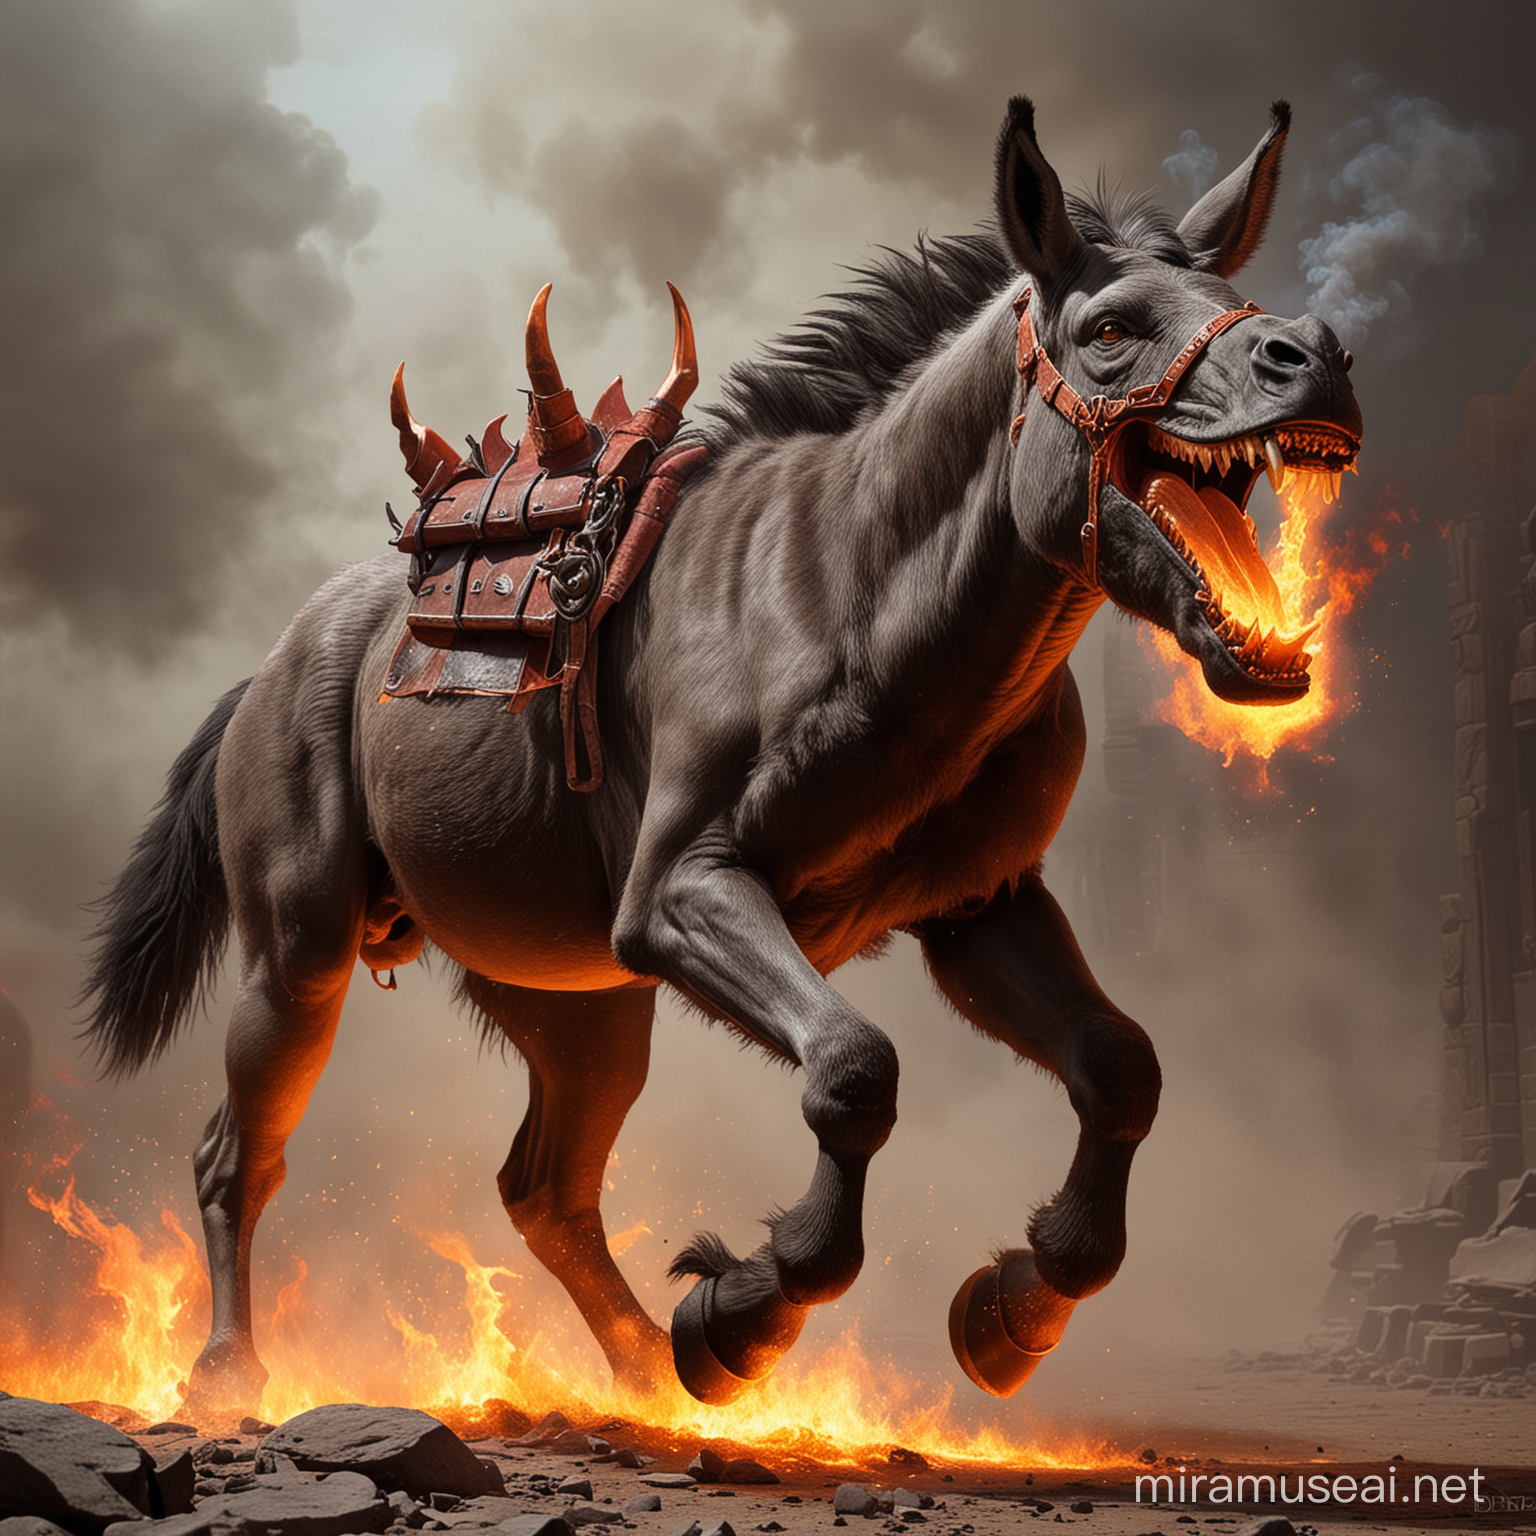 D&D 
Evil 
fire spitting donkey with fiery hooves 
